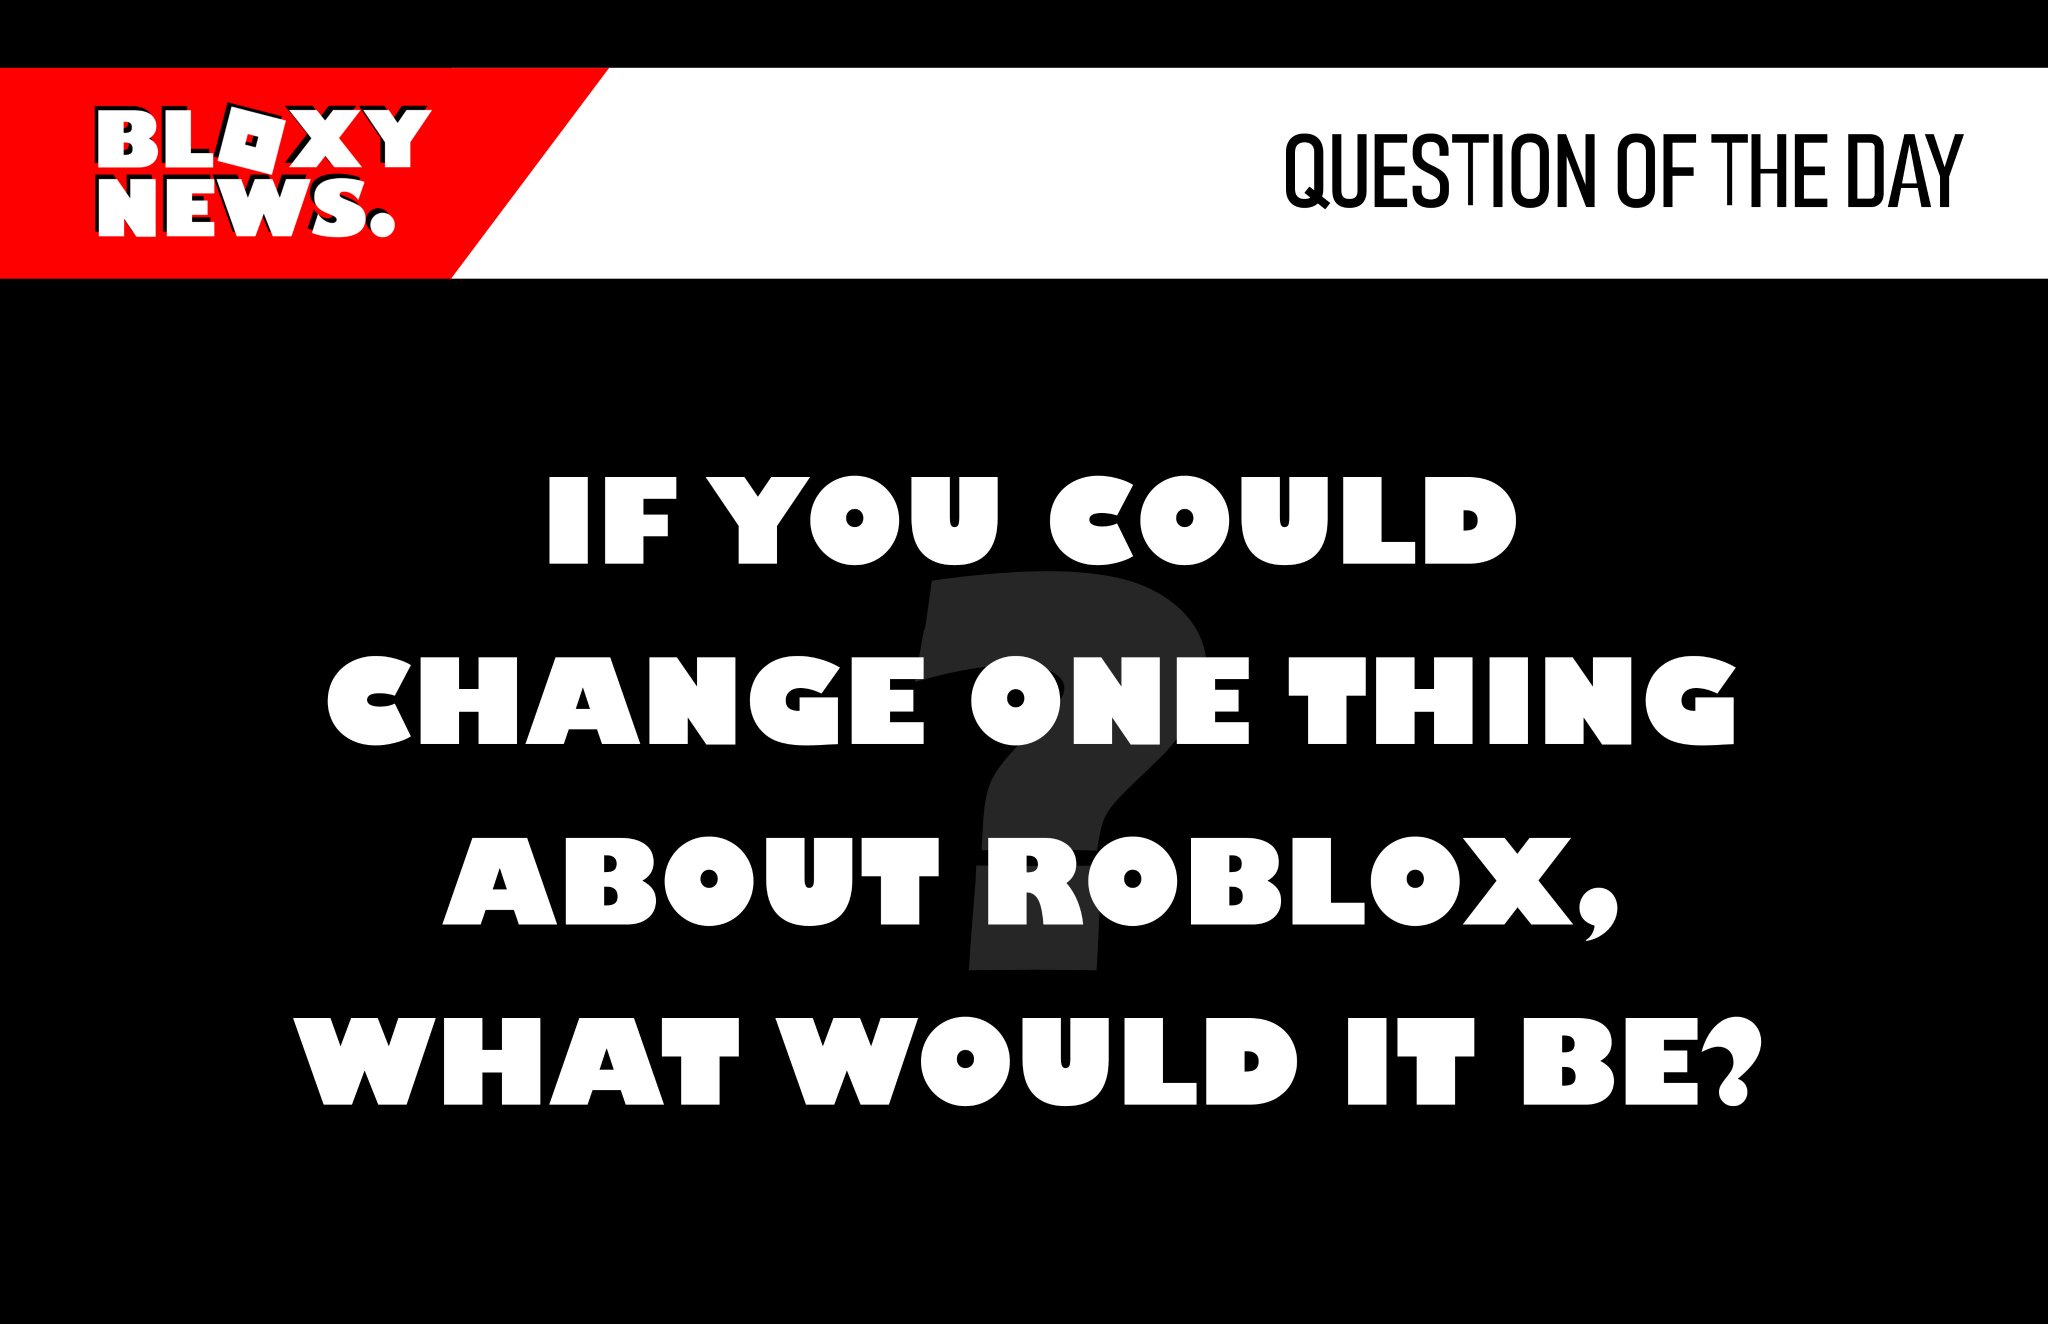 Bloxy News On Twitter Bloxynews Question Of The Day Totally Didn T Forget - bloxy news on twitter bloxynews roblox is removing